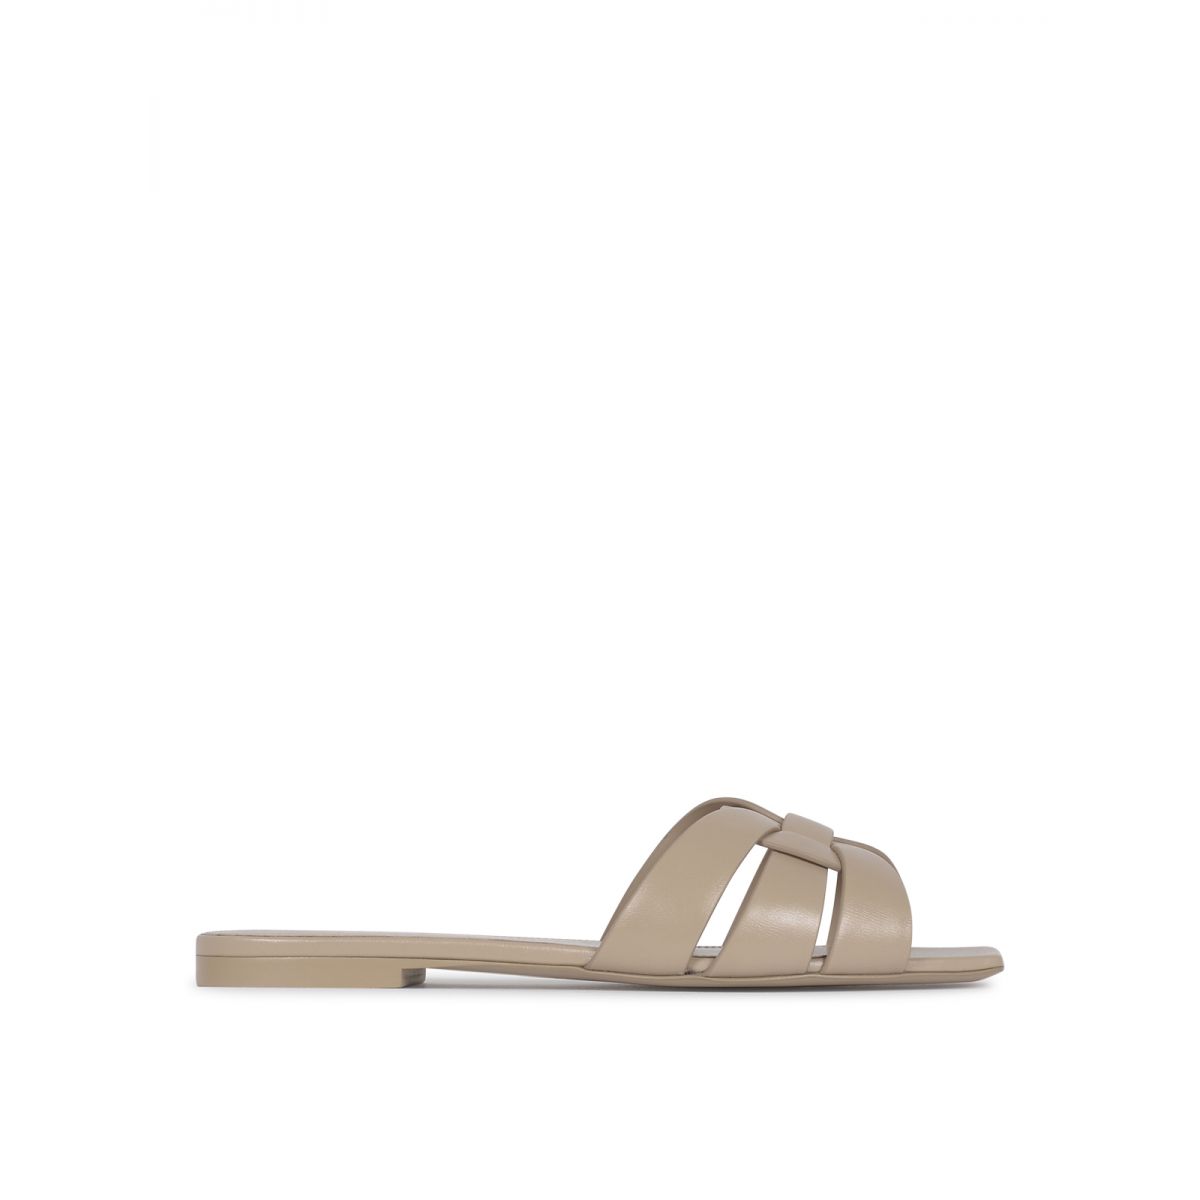 SAINT LAURENT - Tribute flat mules in smooth leather